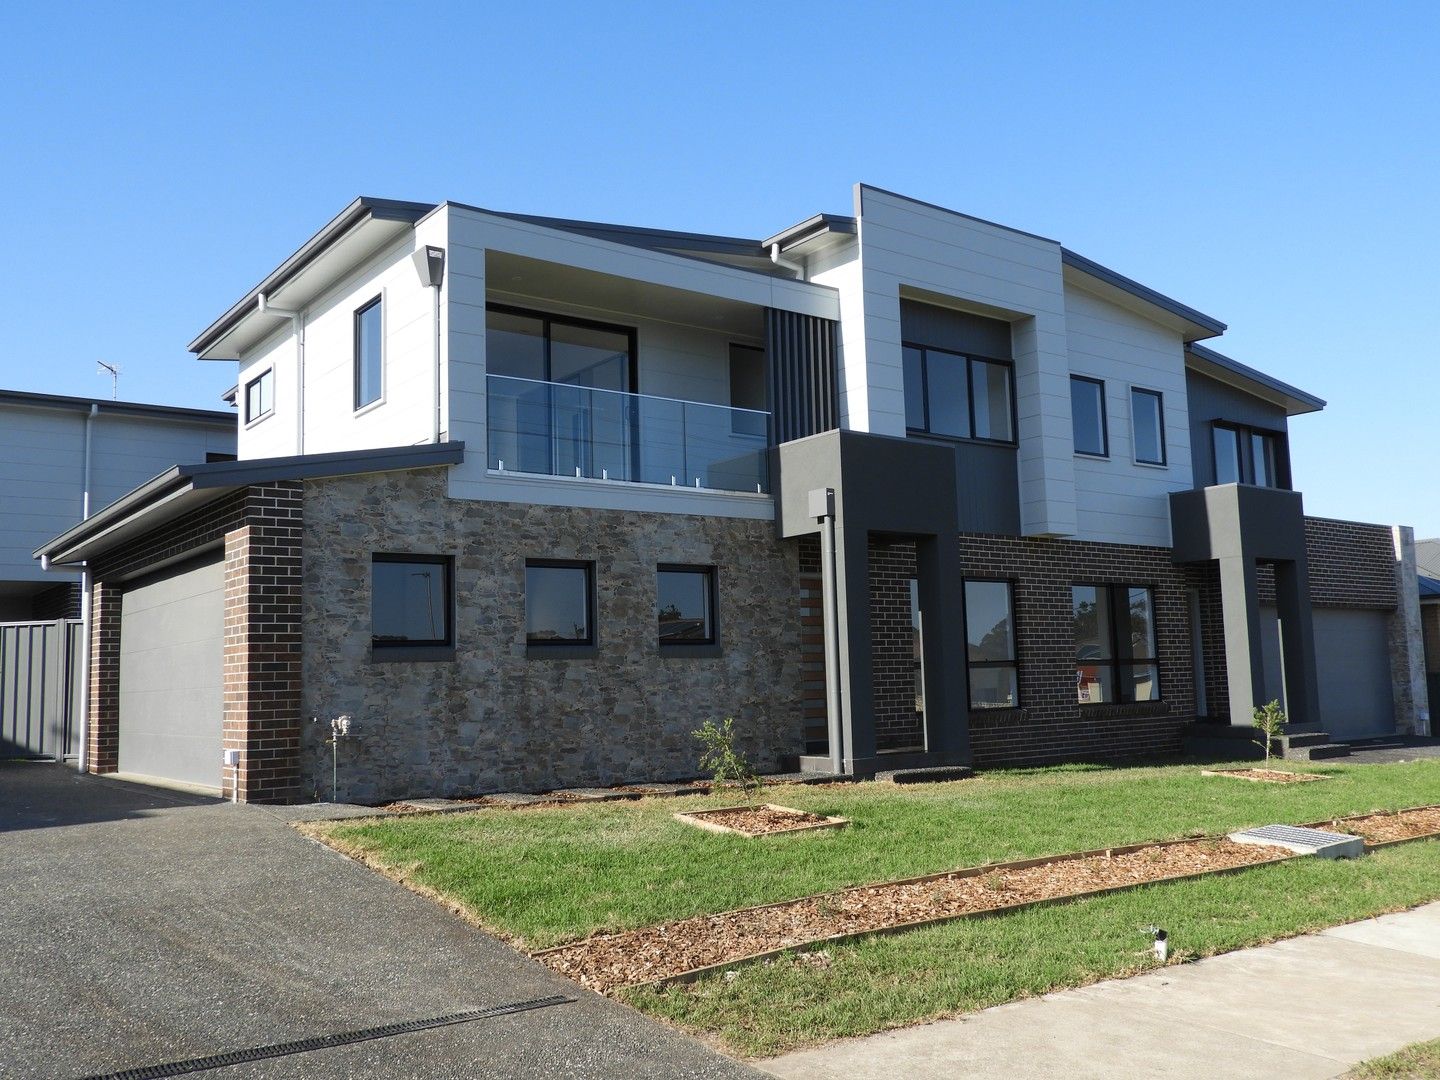 4 bedrooms Townhouse in 3/40 Eager Street CORRIMAL NSW, 2518